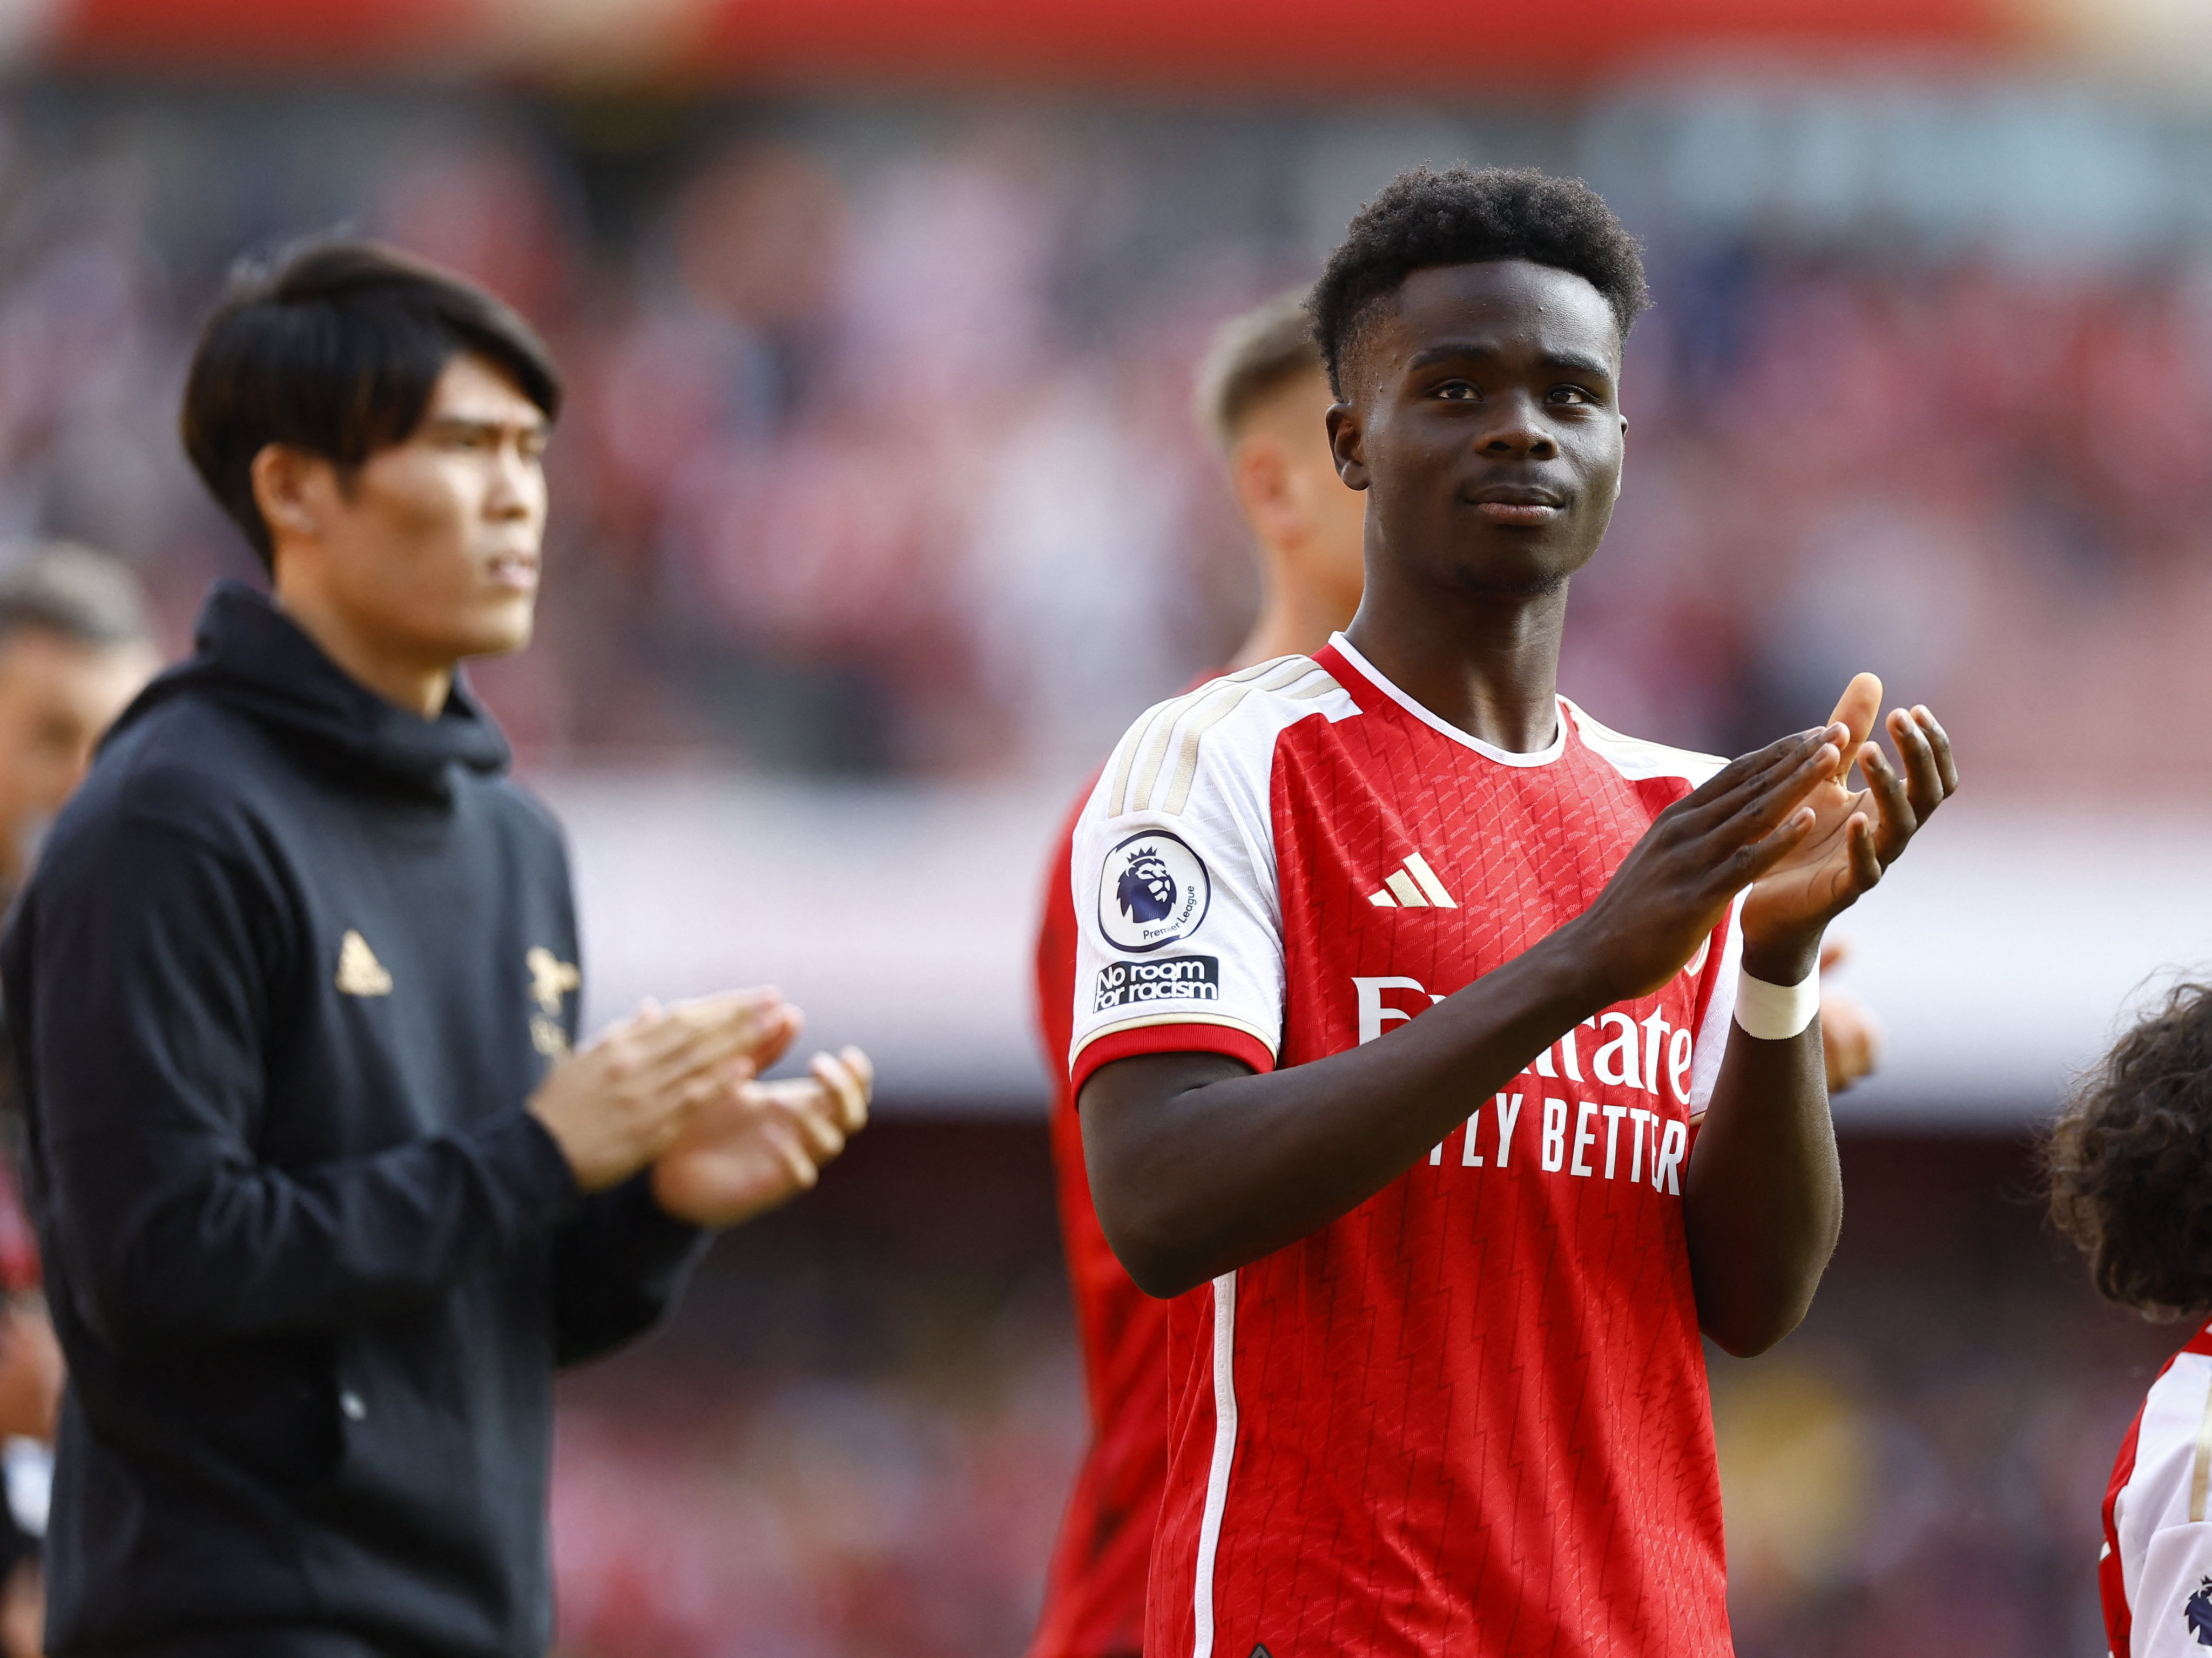 Arsenal’s Bukayo Saka applauds his club’s fans on the final day of the season after their title challenge tailed off. Photo: Reuters